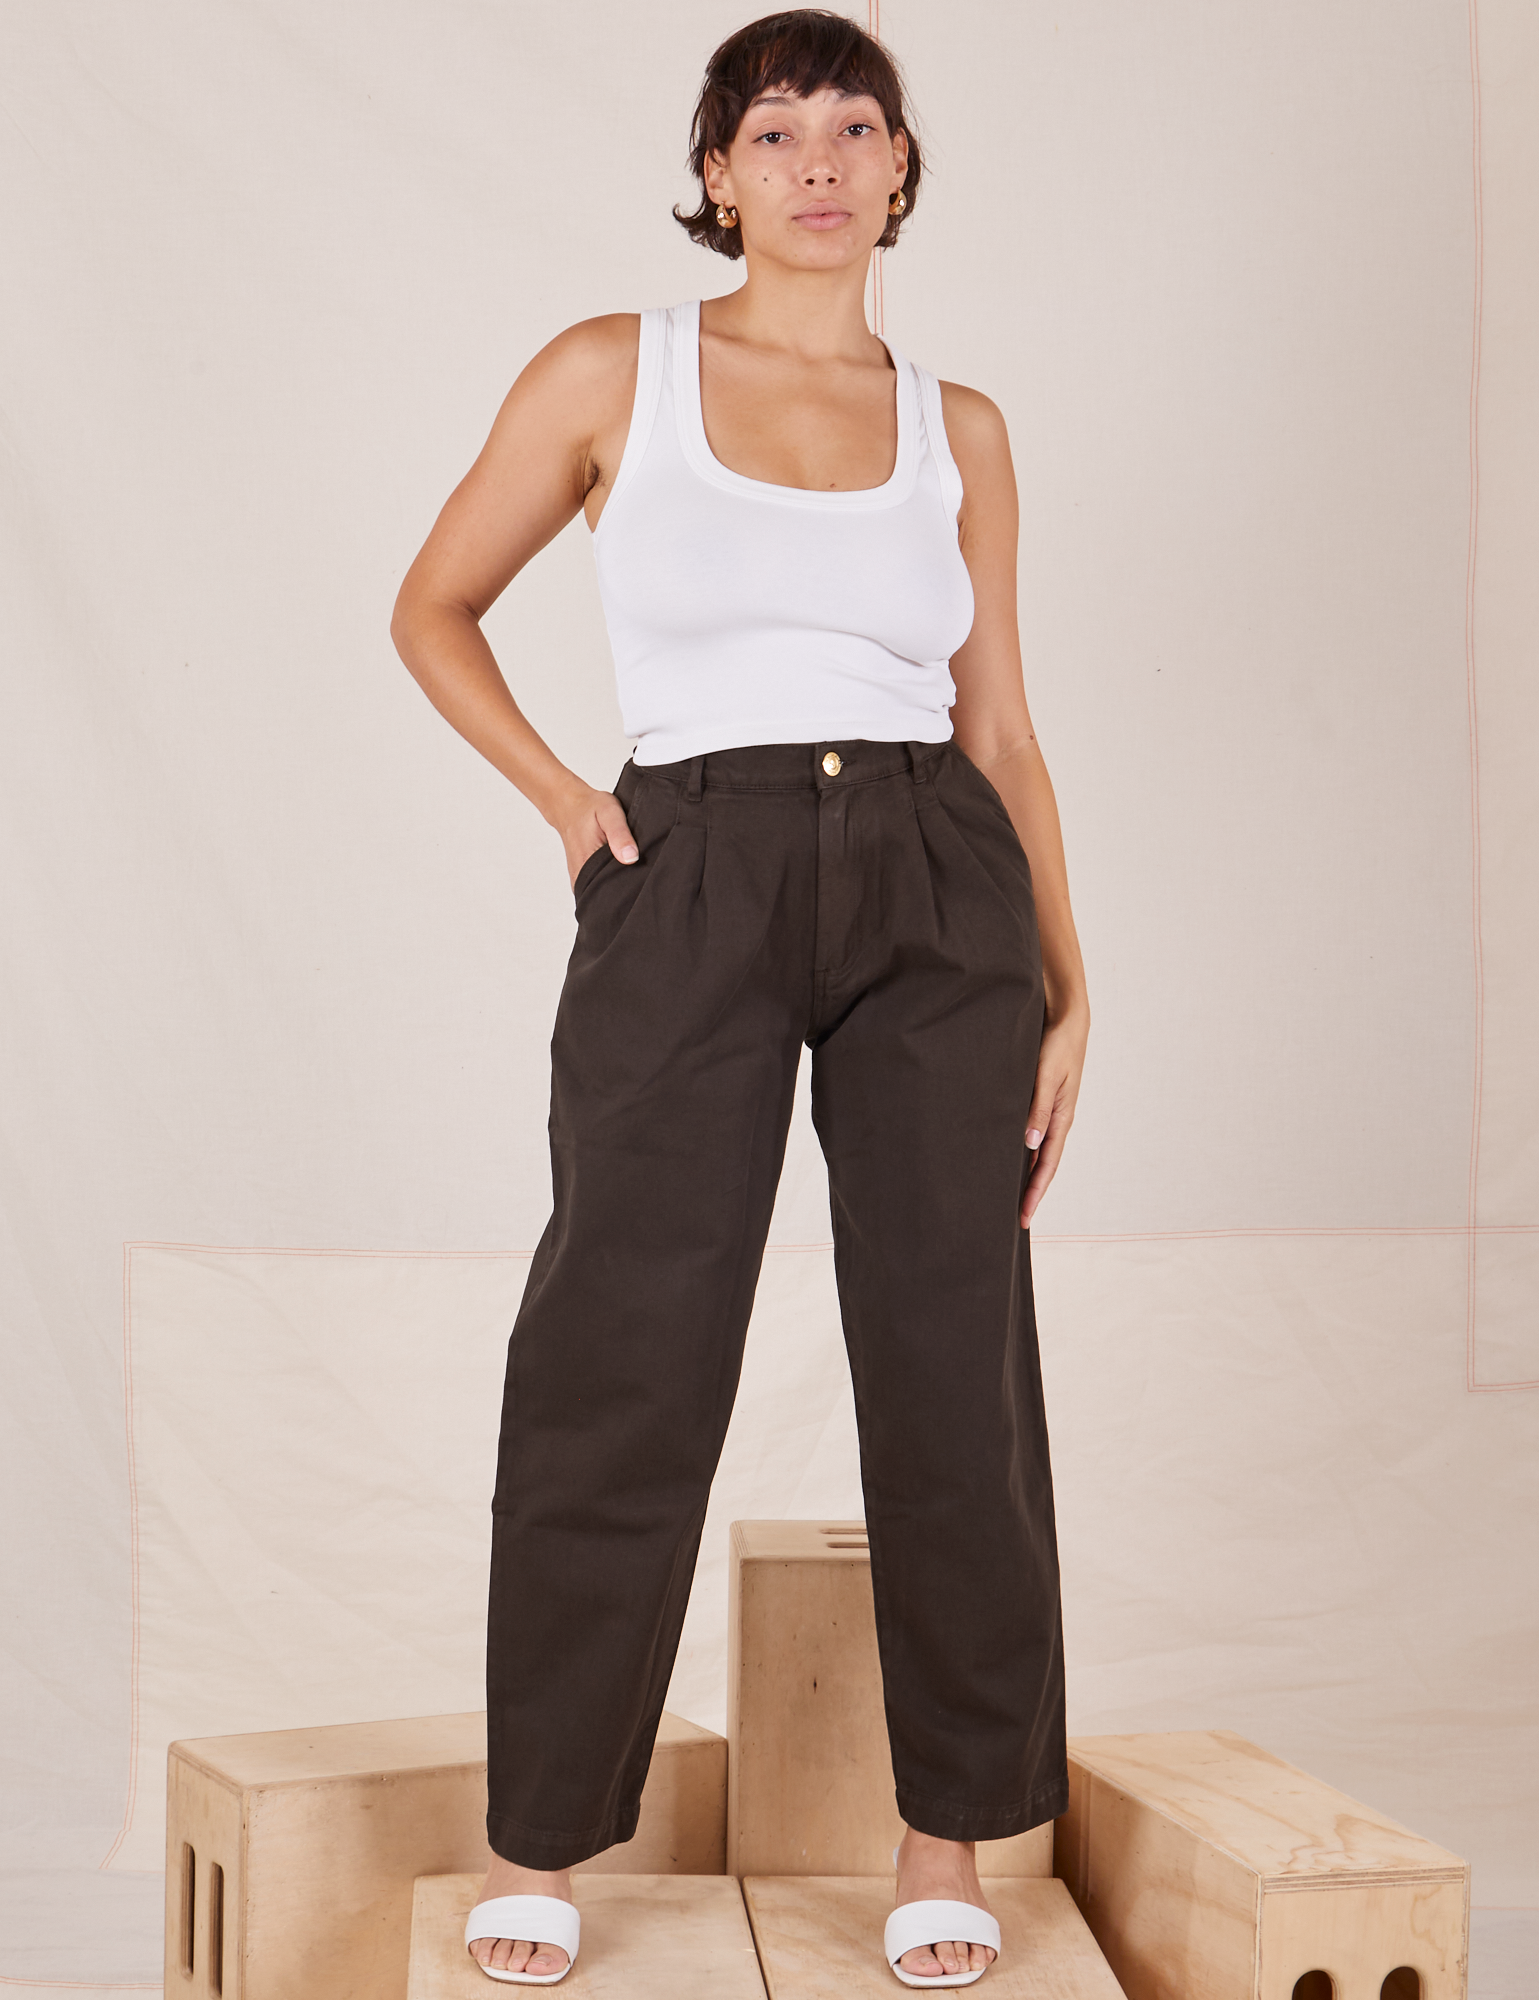 Tiara is 5&#39;4&quot; and wearing S Heavyweight Trousers in Espresso Brown paired with vintage off-white Cropped Tank Top